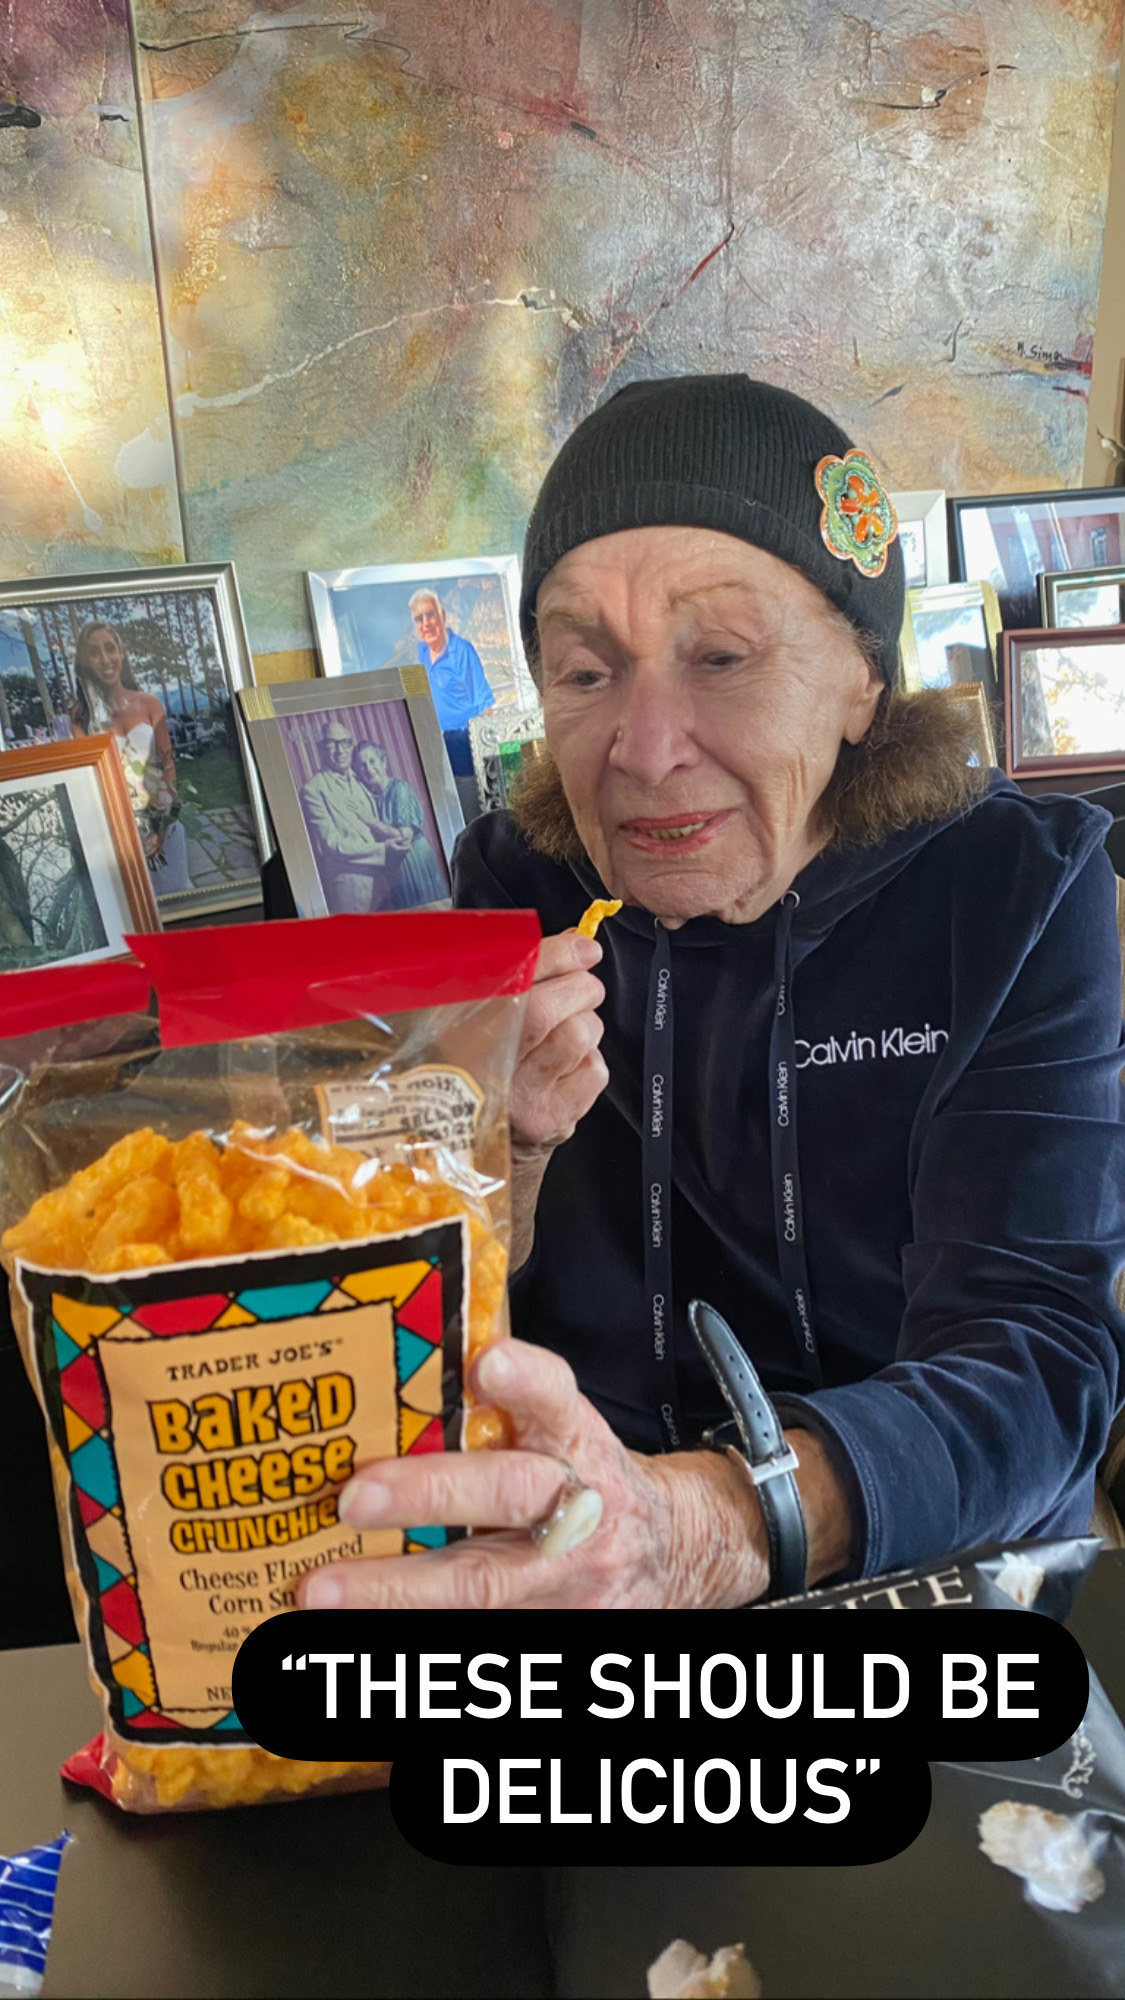 My grandma inspecting a bag of baked cheese crunchies.